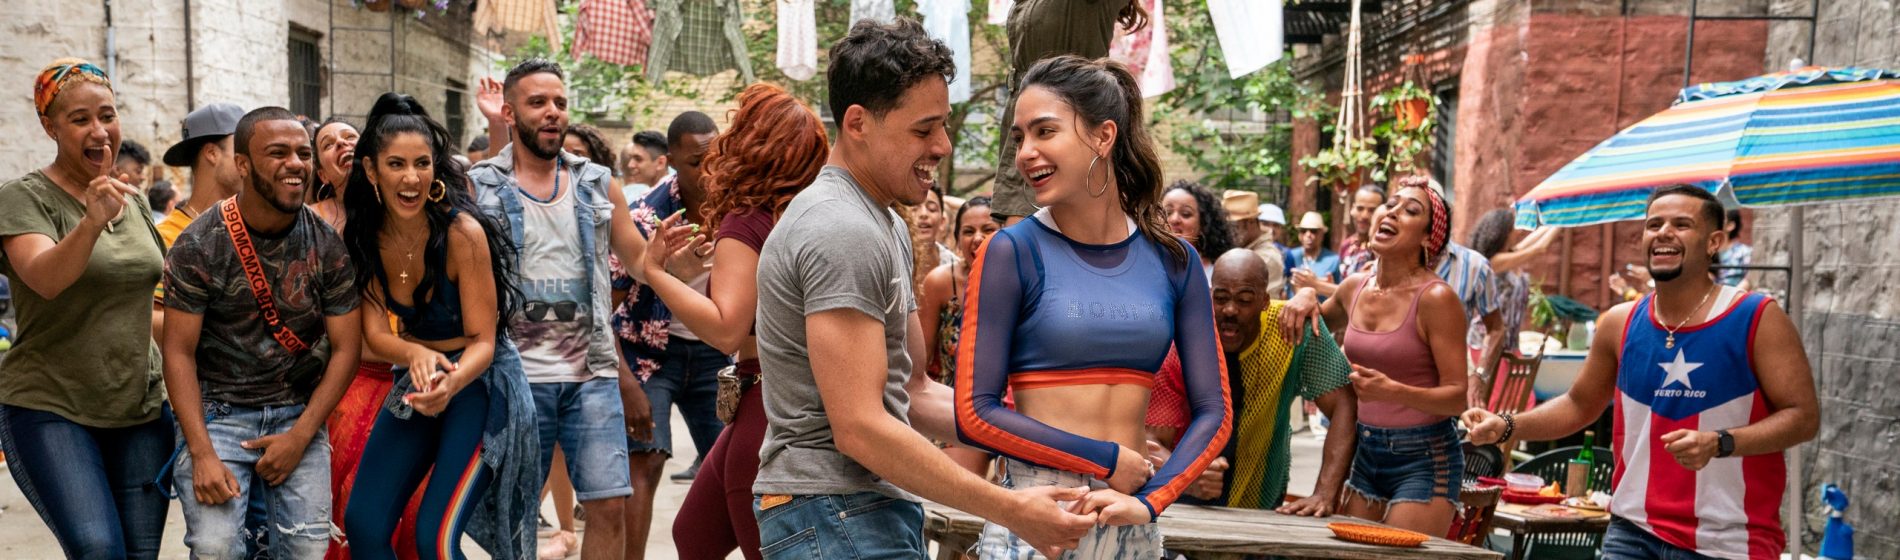 In the Heights movie Anthony Ramos and Melissa Barrera